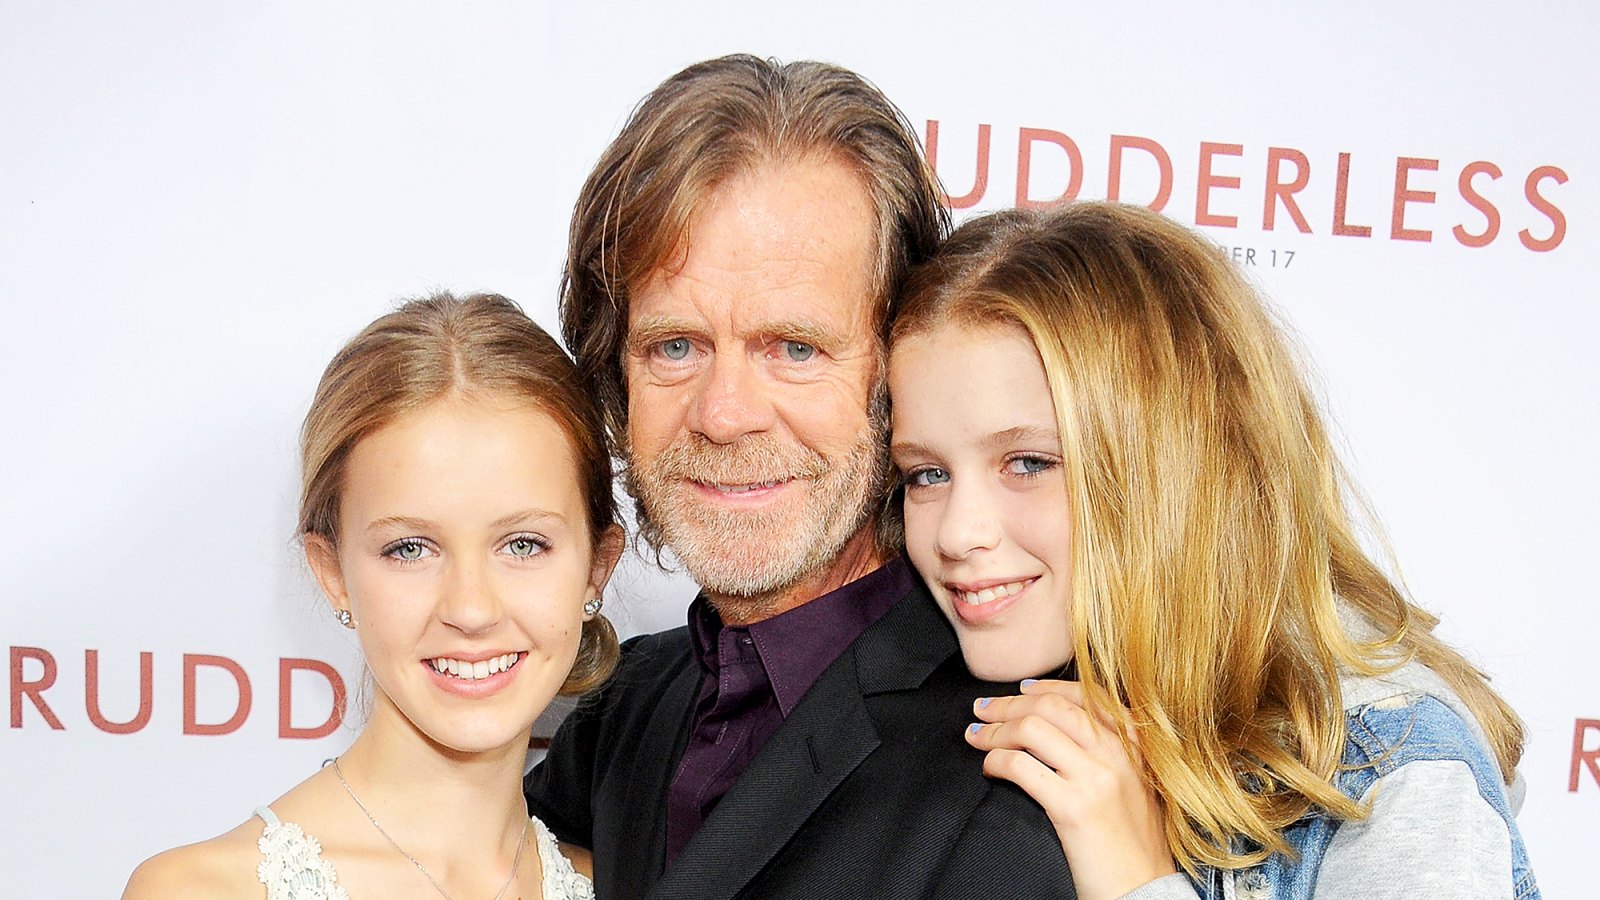 William H. Macy and daughters Georgia and Sophia arrive at the 2014 Los Angeles VIP Screening of "Rudderless" at the Vista Theatre in Los Angeles, California.